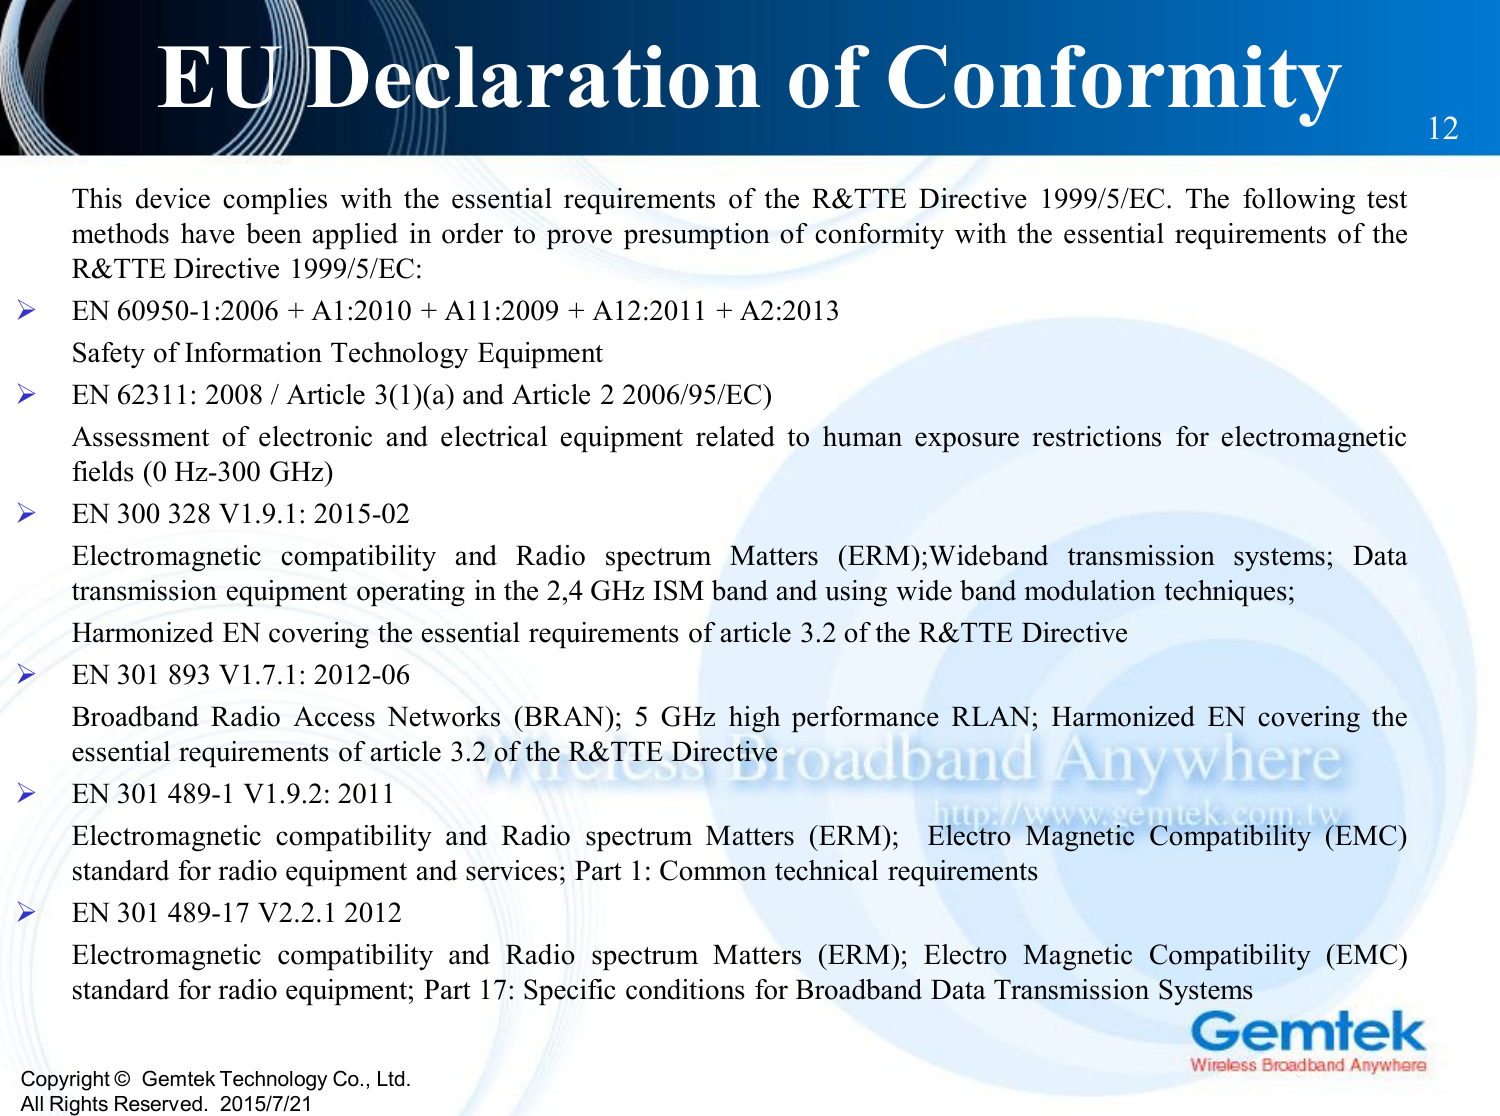 Copyright ©  Gemtek Technology Co., Ltd.All Rights Reserved.  2015/7/21EU Declaration of Conformity 12This device complies with the essential requirements of the R&amp;TTE Directive 1999/5/EC. The following testmethods have been applied in order to prove presumption of conformity with the essential requirements of theR&amp;TTE Directive 1999/5/EC:EN 60950-1:2006 + A1:2010 + A11:2009 + A12:2011 + A2:2013Safety of Information Technology EquipmentEN 62311: 2008 / Article 3(1)(a) and Article 2 2006/95/EC)Assessment of electronic and electrical equipment related to human exposure restrictions for electromagneticfields (0 Hz-300 GHz)EN 300 328 V1.9.1: 2015-02Electromagnetic compatibility and Radio spectrum Matters (ERM);Wideband transmission systems; Datatransmission equipment operating in the 2,4 GHz ISM band and using wide band modulation techniques;Harmonized EN covering the essential requirements of article 3.2 of the R&amp;TTE DirectiveEN 301 893 V1.7.1: 2012-06Broadband Radio Access Networks (BRAN); 5 GHz high performance RLAN; Harmonized EN covering theessential requirements of article 3.2 of the R&amp;TTE DirectiveEN 301 489-1 V1.9.2: 2011Electromagnetic compatibility and Radio spectrum Matters (ERM); Electro Magnetic Compatibility (EMC)standard for radio equipment and services; Part 1: Common technical requirementsEN 301 489-17 V2.2.1 2012Electromagnetic compatibility and Radio spectrum Matters (ERM); Electro Magnetic Compatibility (EMC)standard for radio equipment; Part 17: Specific conditions for Broadband Data Transmission Systems